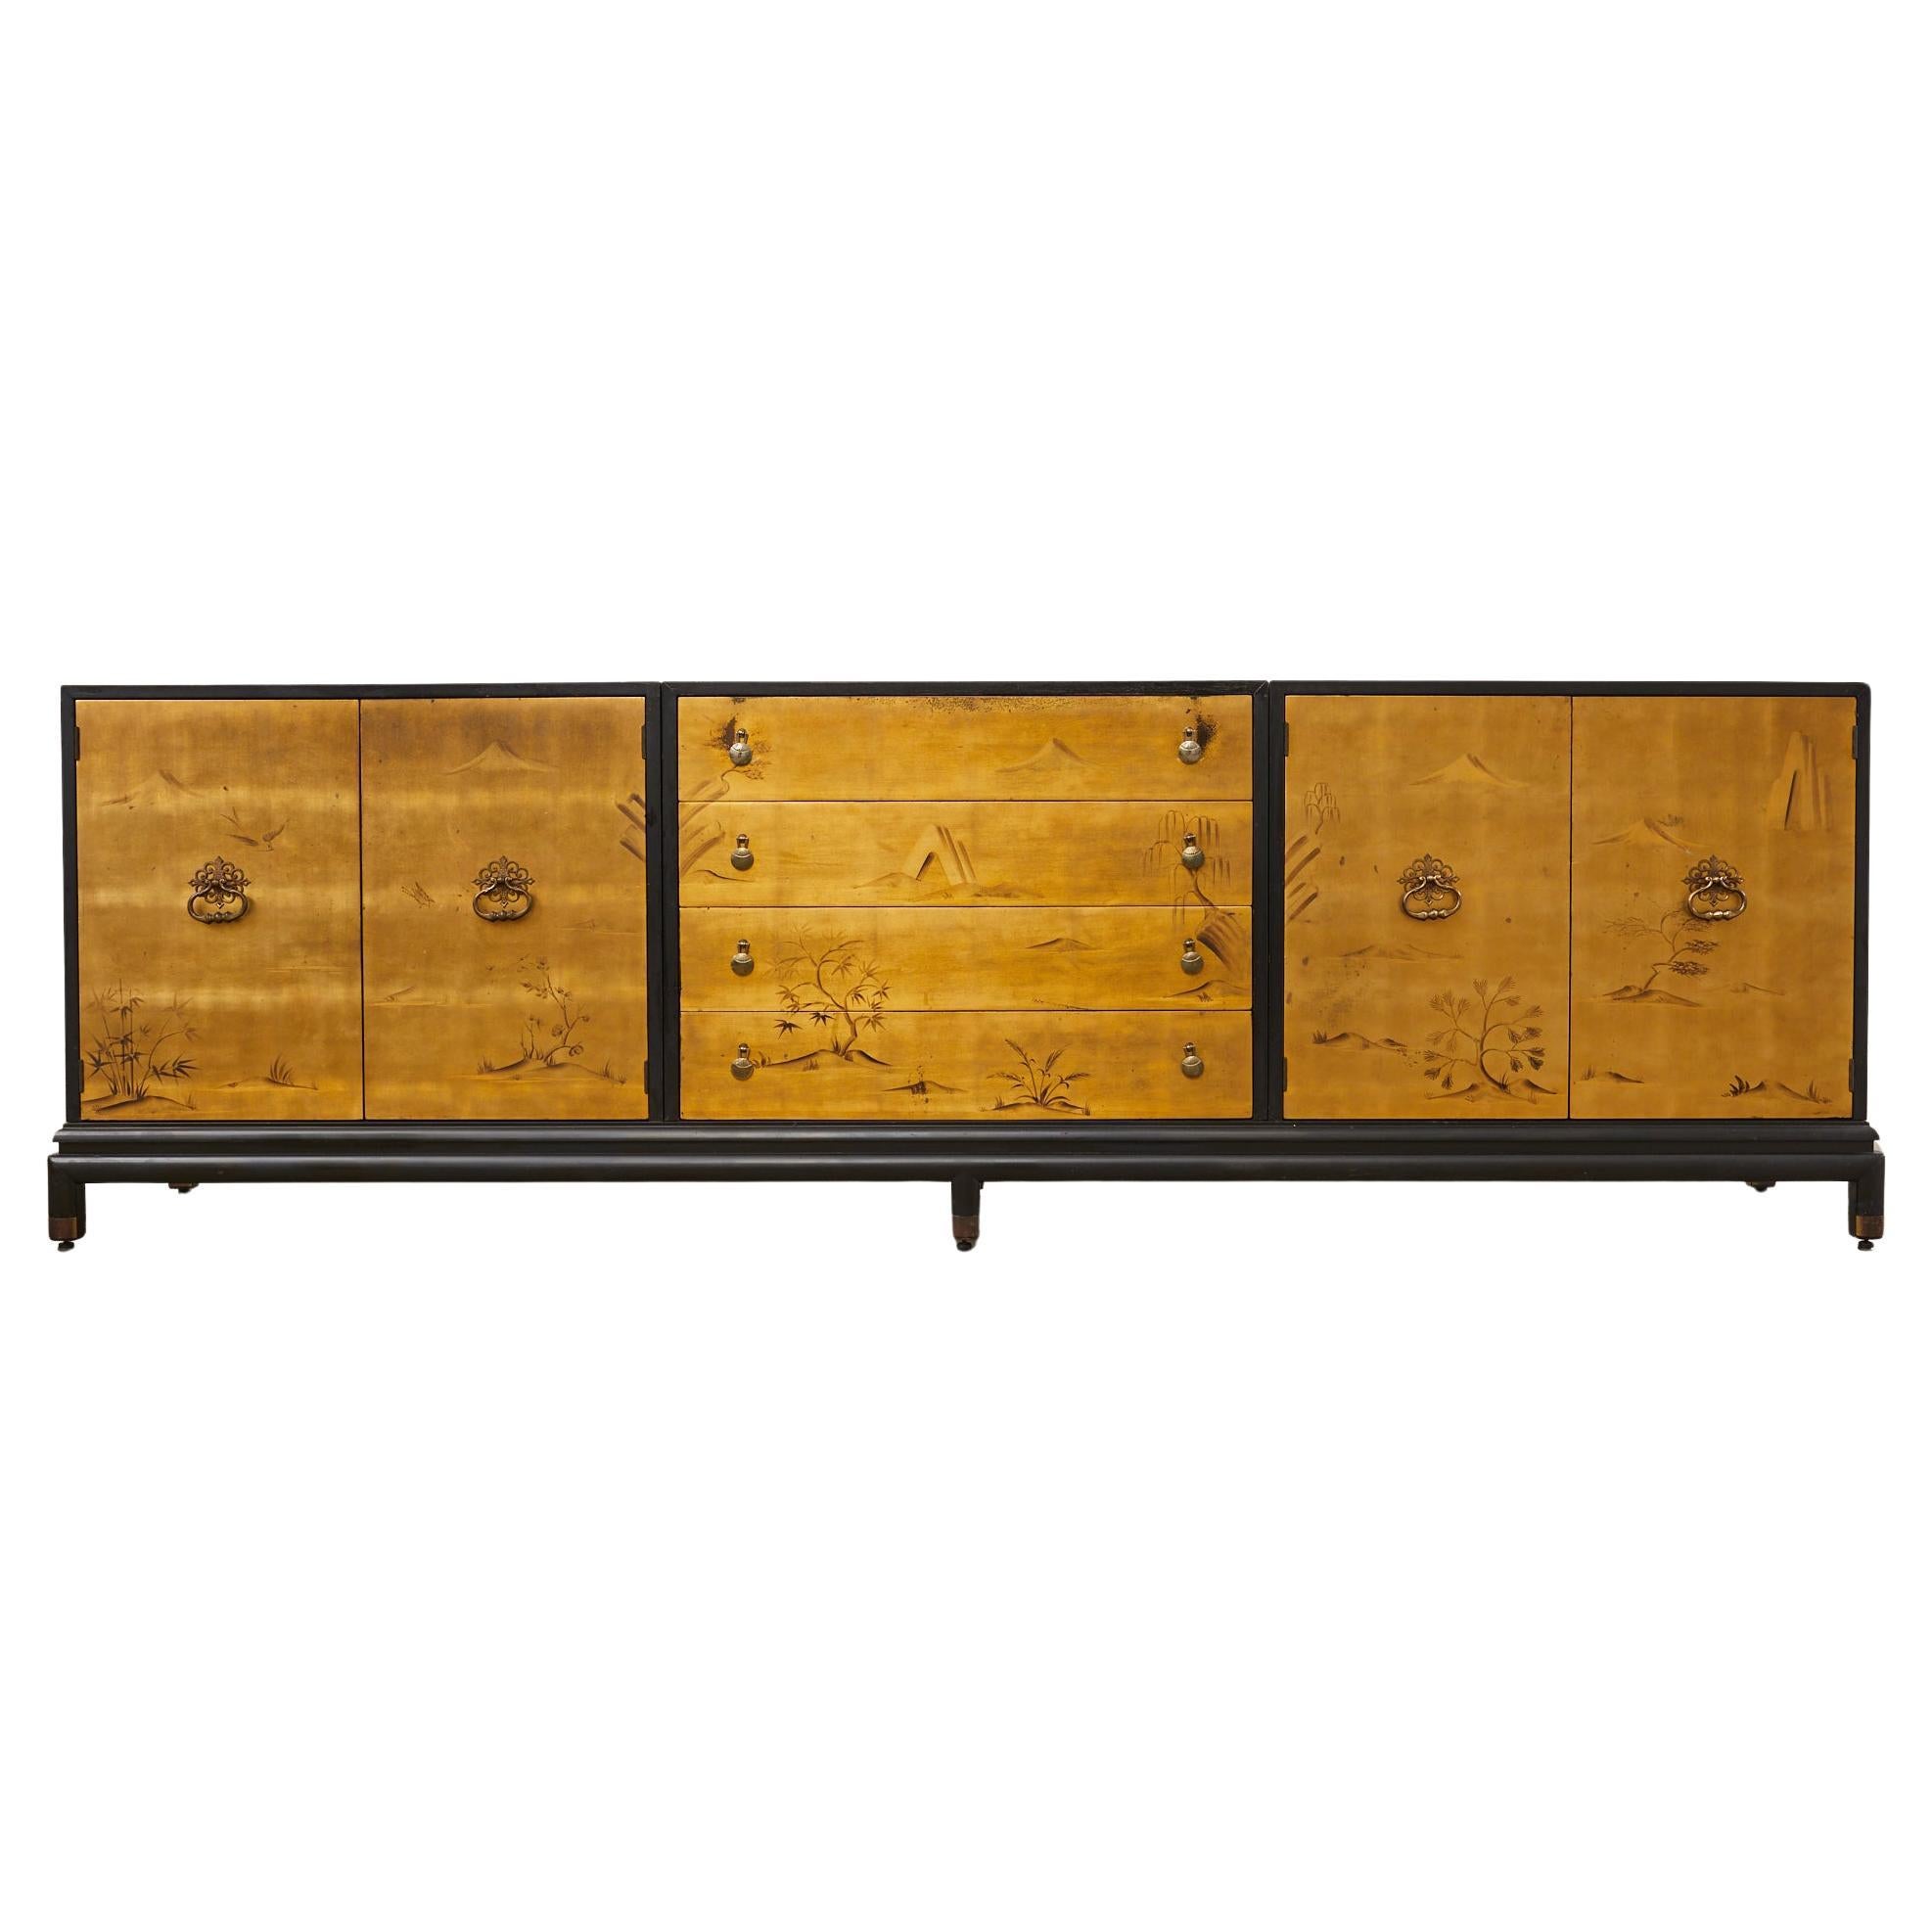 Renzo Rutilli Chinoiserie Decorated Gold Leaf Cabinet Credenza For Sale